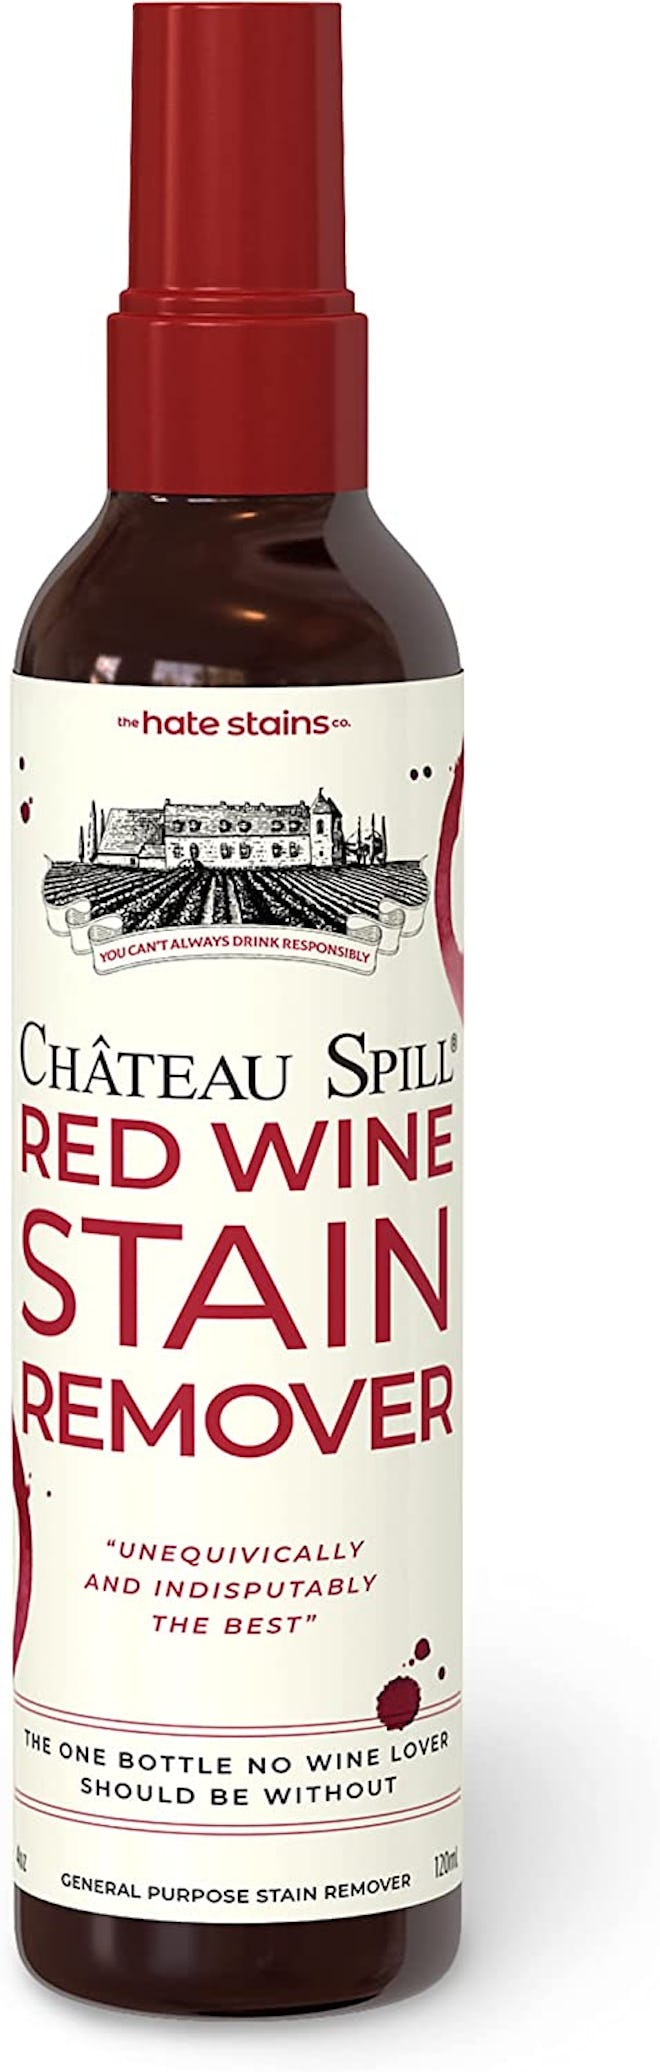 Emergency Stain Rescue CHATEAU SPILL Red Wine Stain Remover